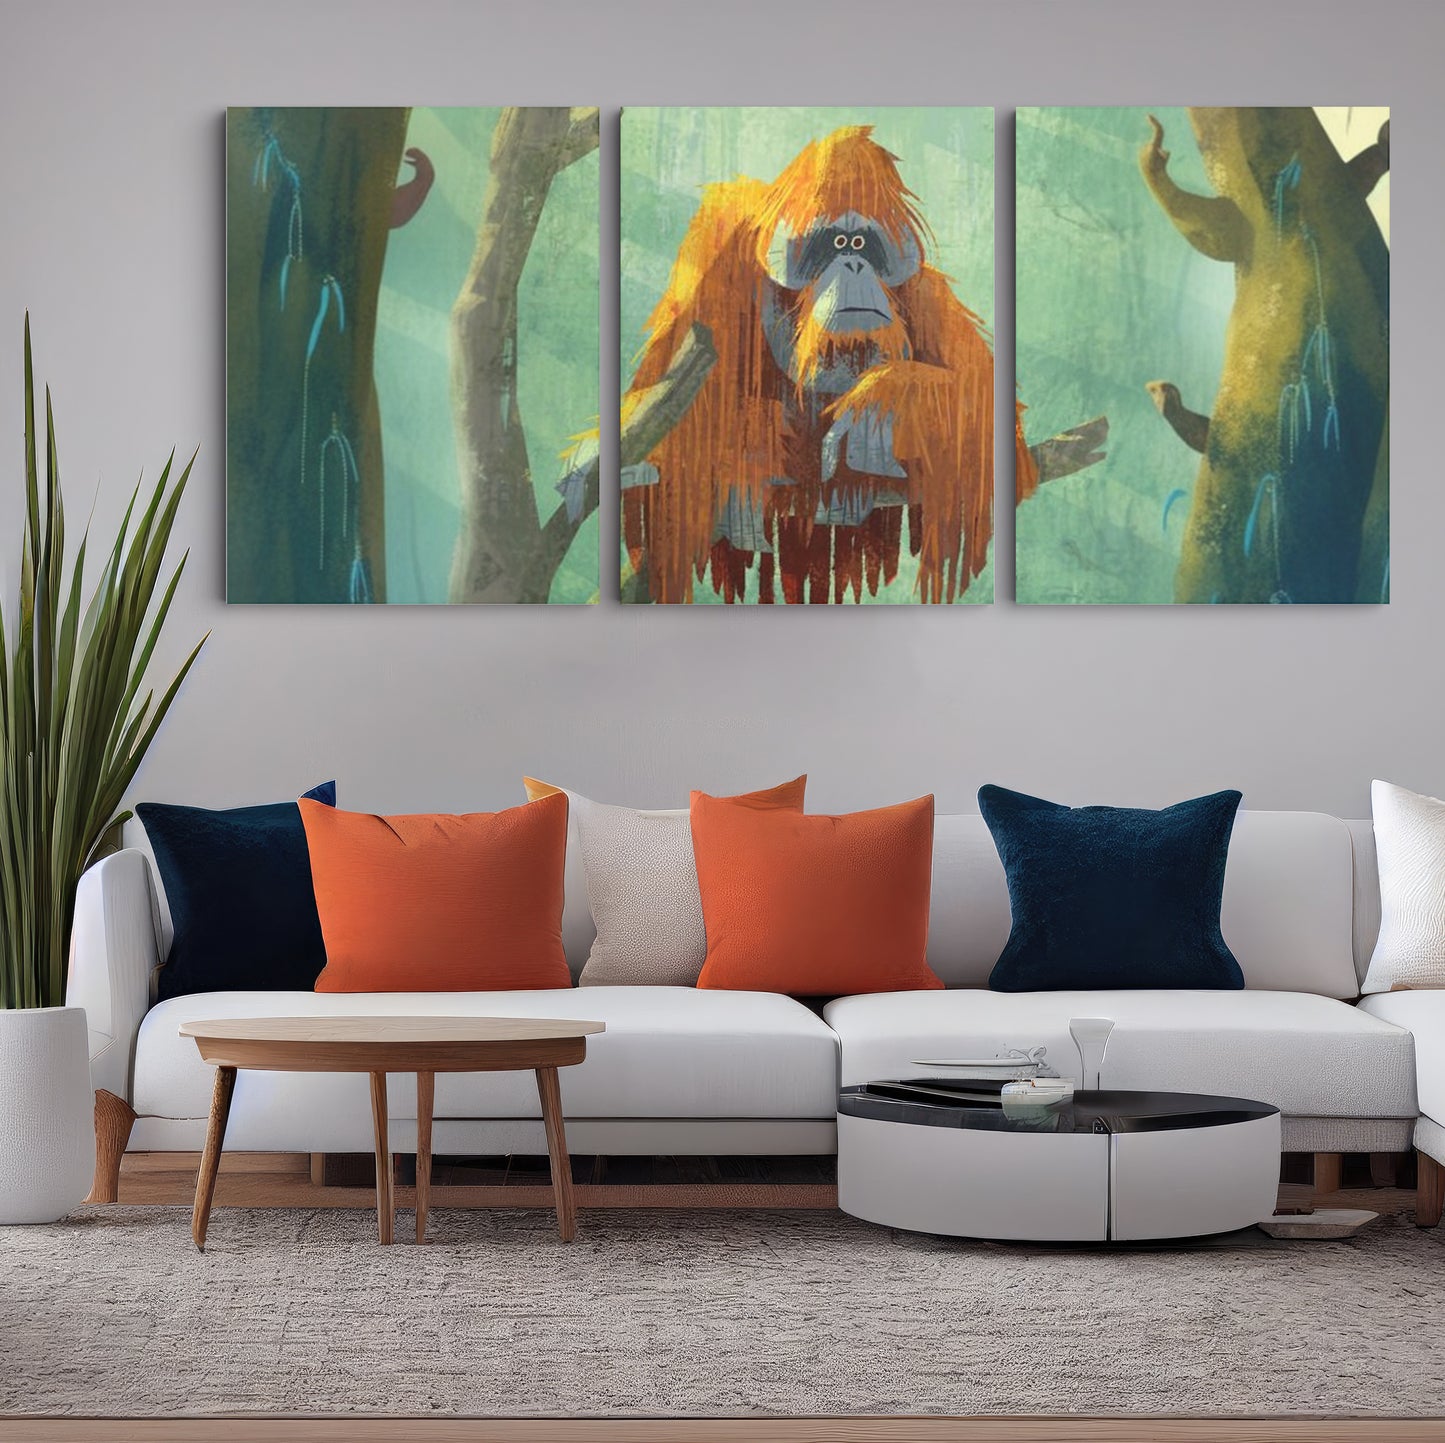 Wild Serenity: A Wall Art Immersing You in an Orangutan's World Within the Forest - Embrace the Tranquility of Primal Beauty - S05E66